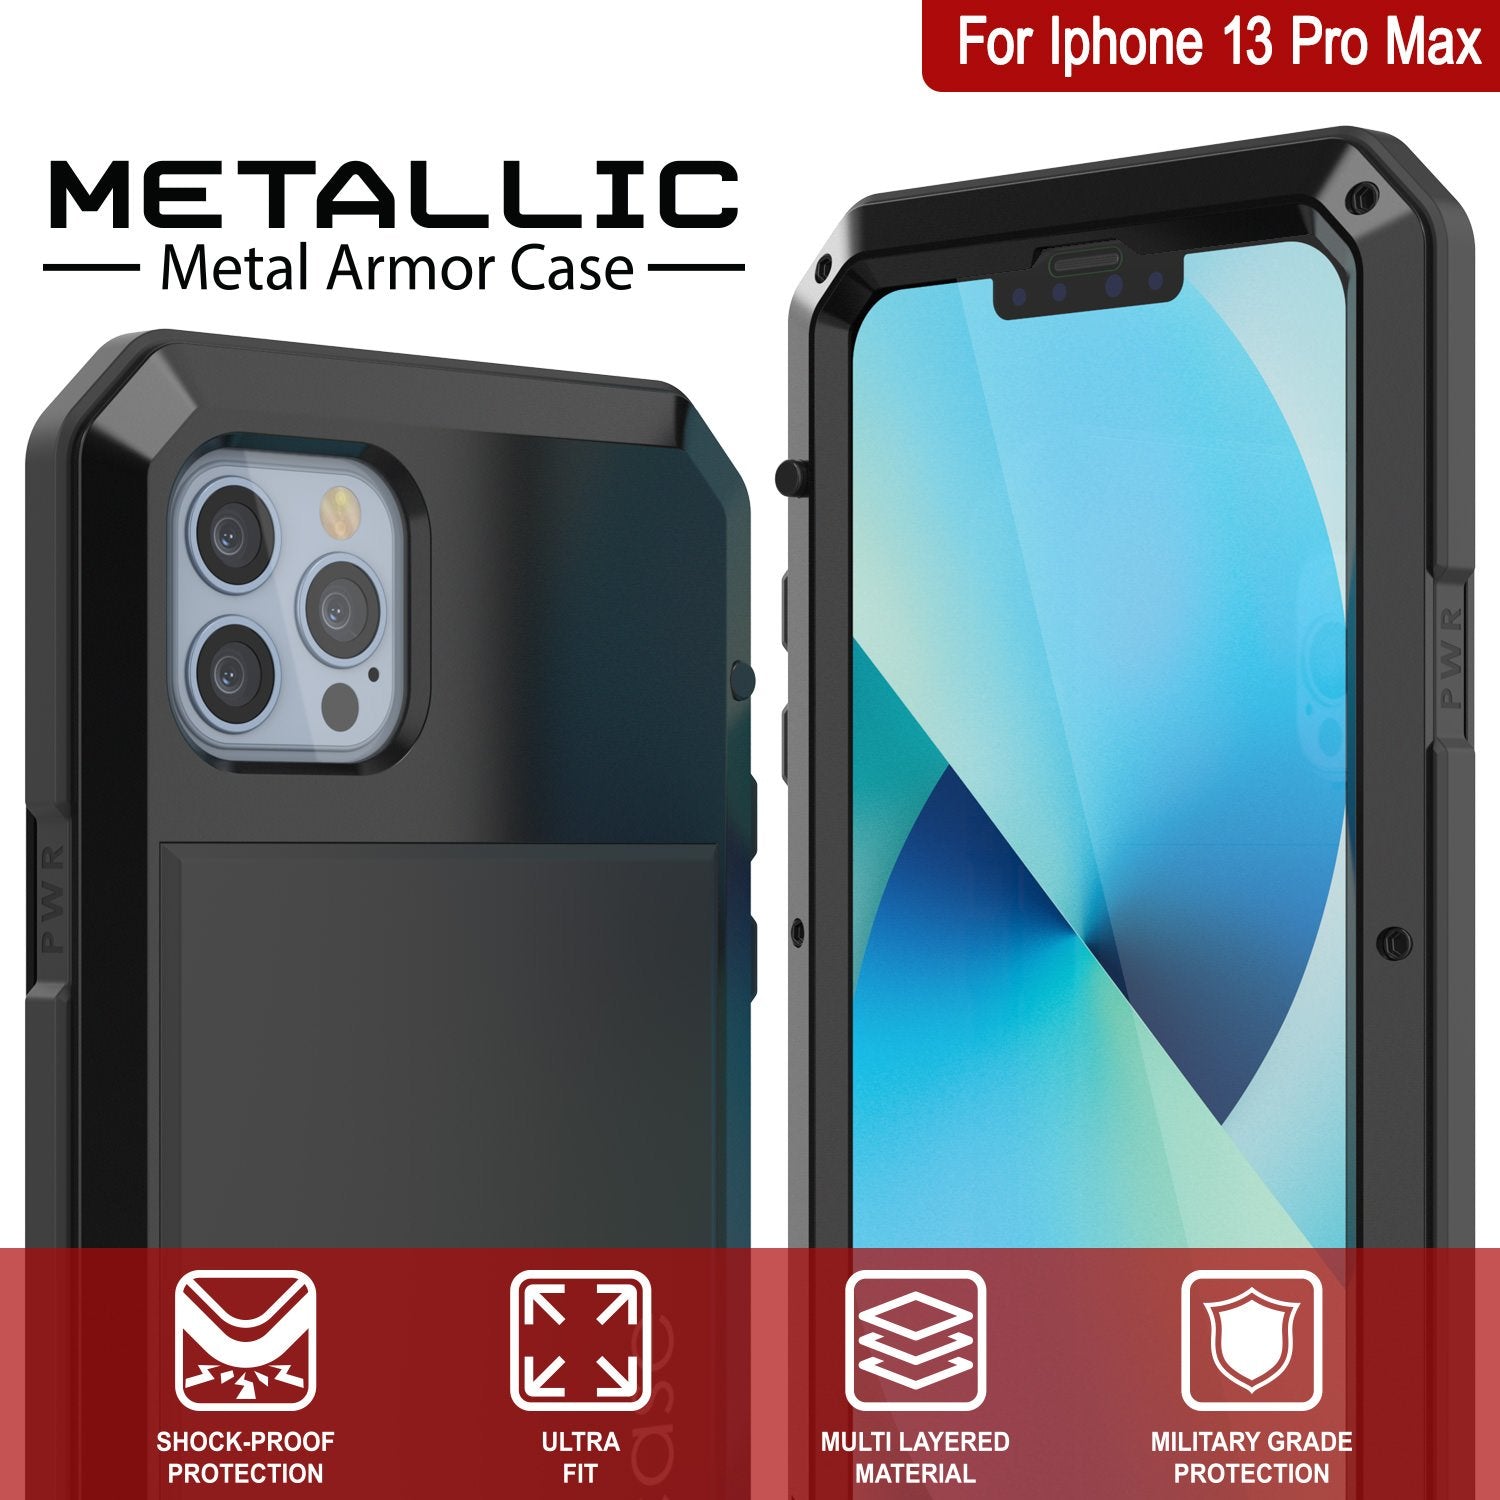 iPhone 13 Pro Max Metal Case, Heavy Duty Military Grade Armor Cover [shock proof] Full Body Hard [Black]